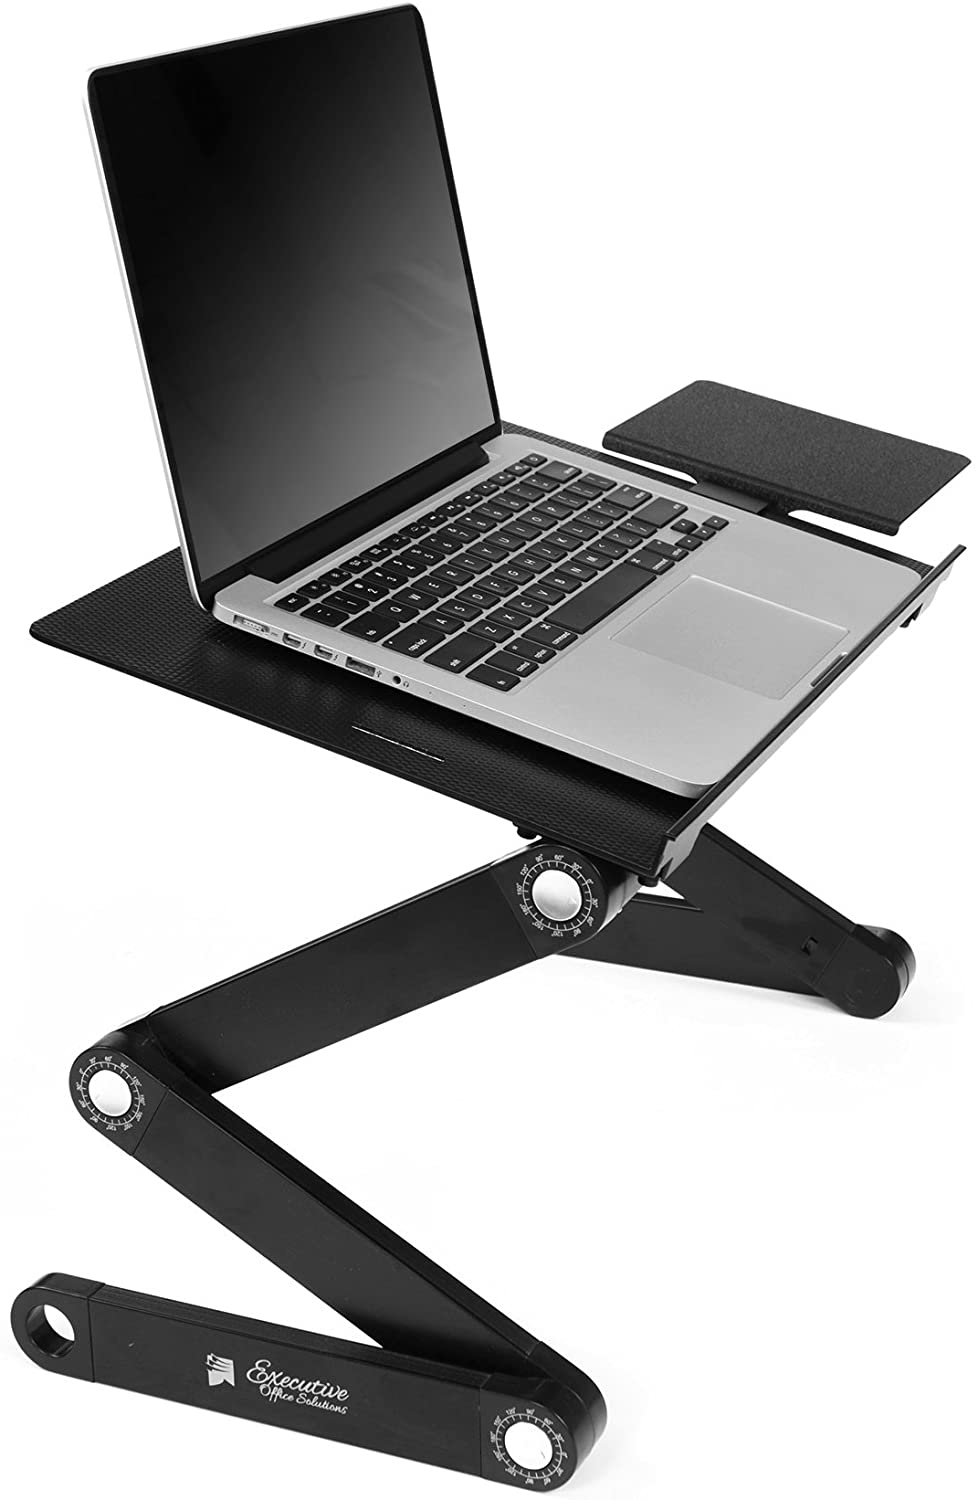 Mingo Labs AP-1 Laptop Stand with Cord Management for 10-15 Laptops Silver